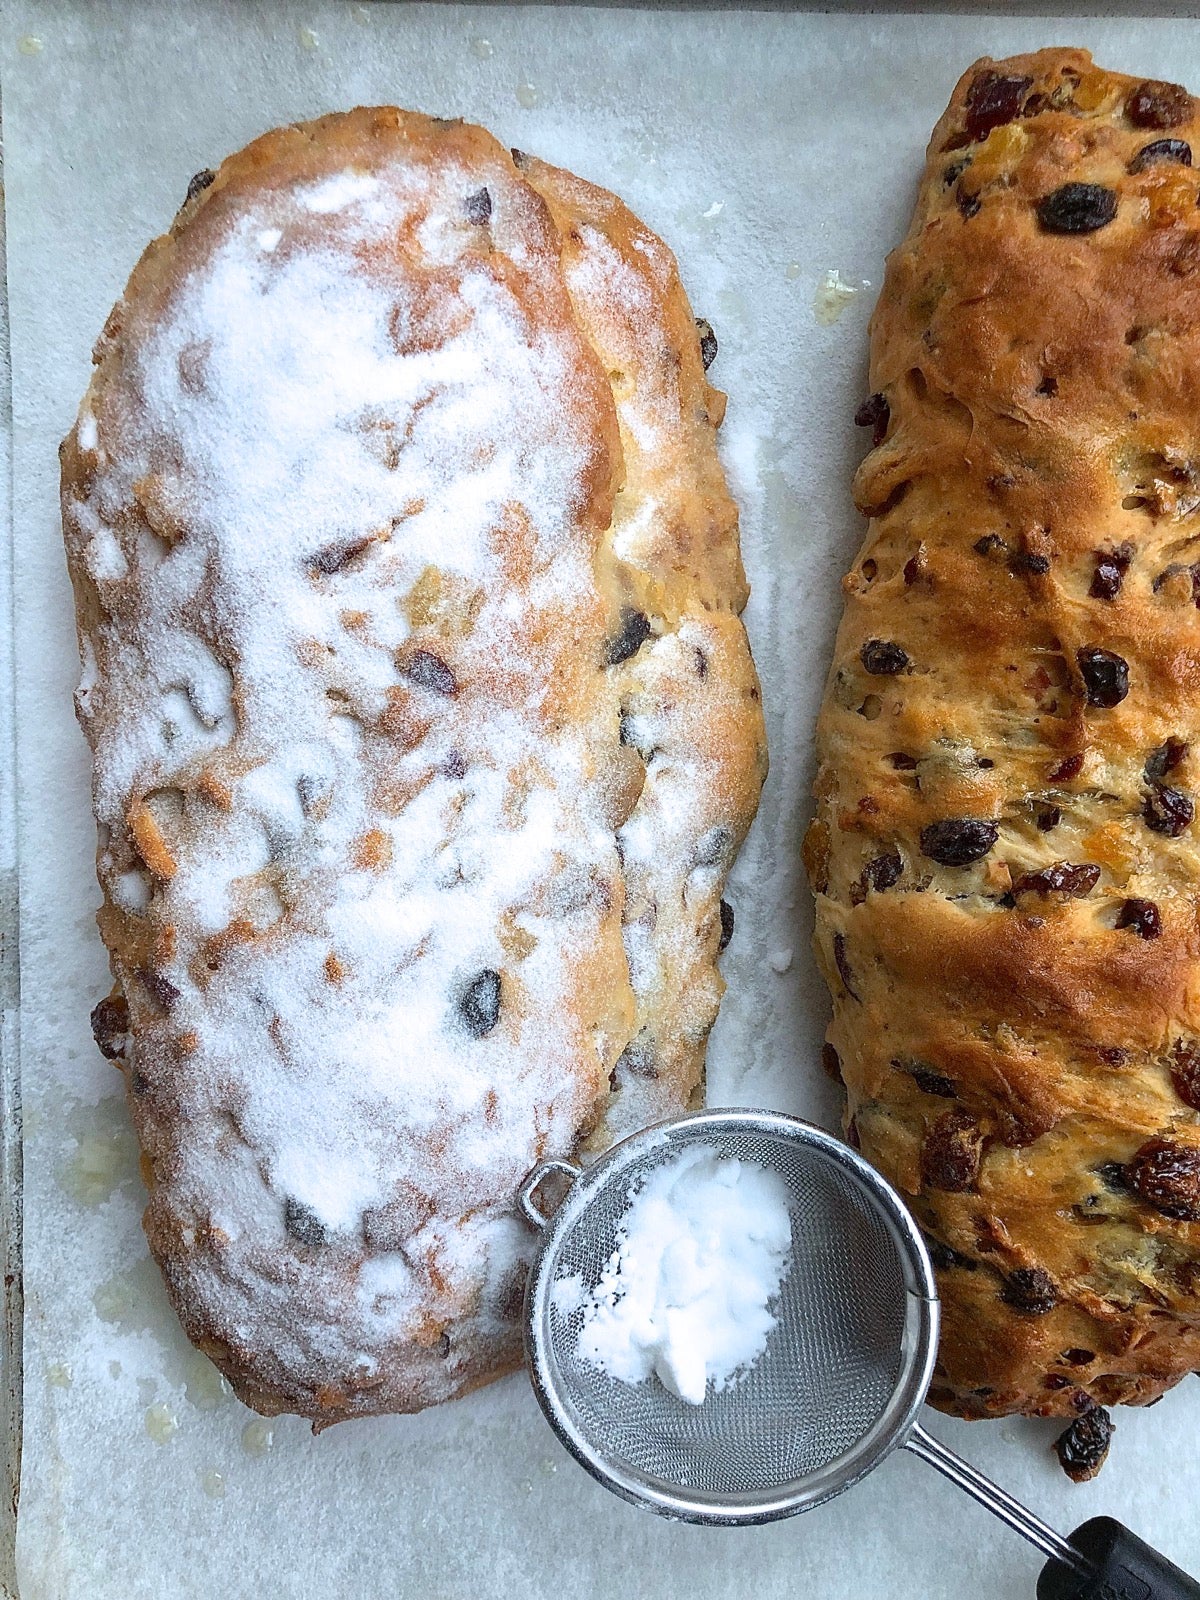 Finished stollen brushed with butter and showered with superfine sugar.